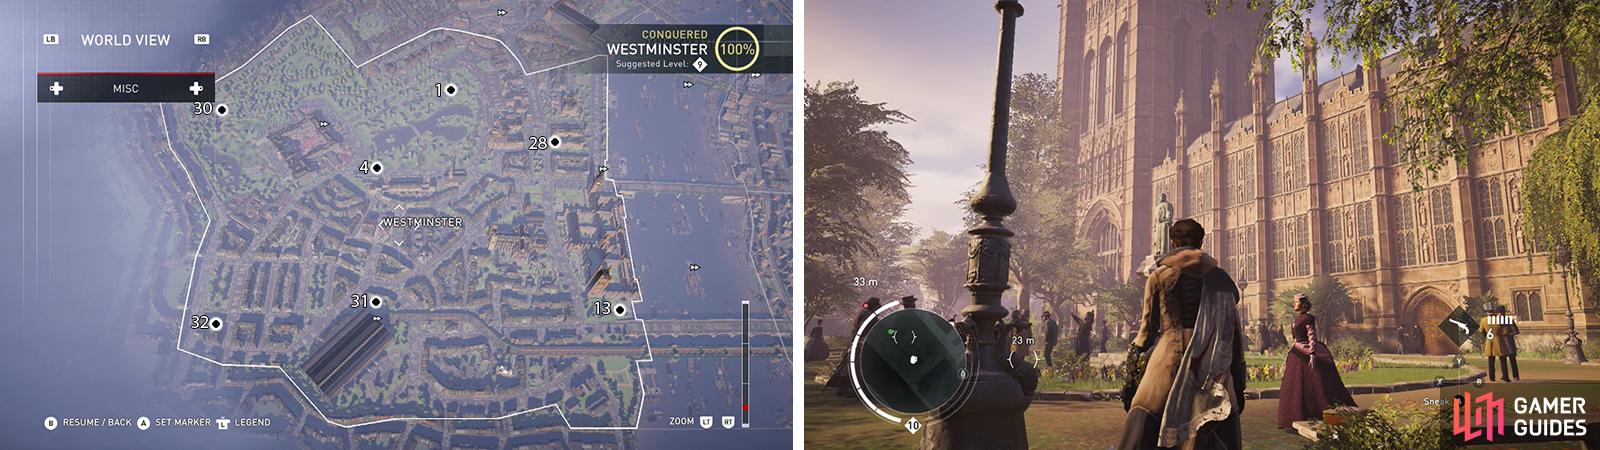 The Secrets of London can be found on the map (left). Location of Secret of London #13 pictured (right).